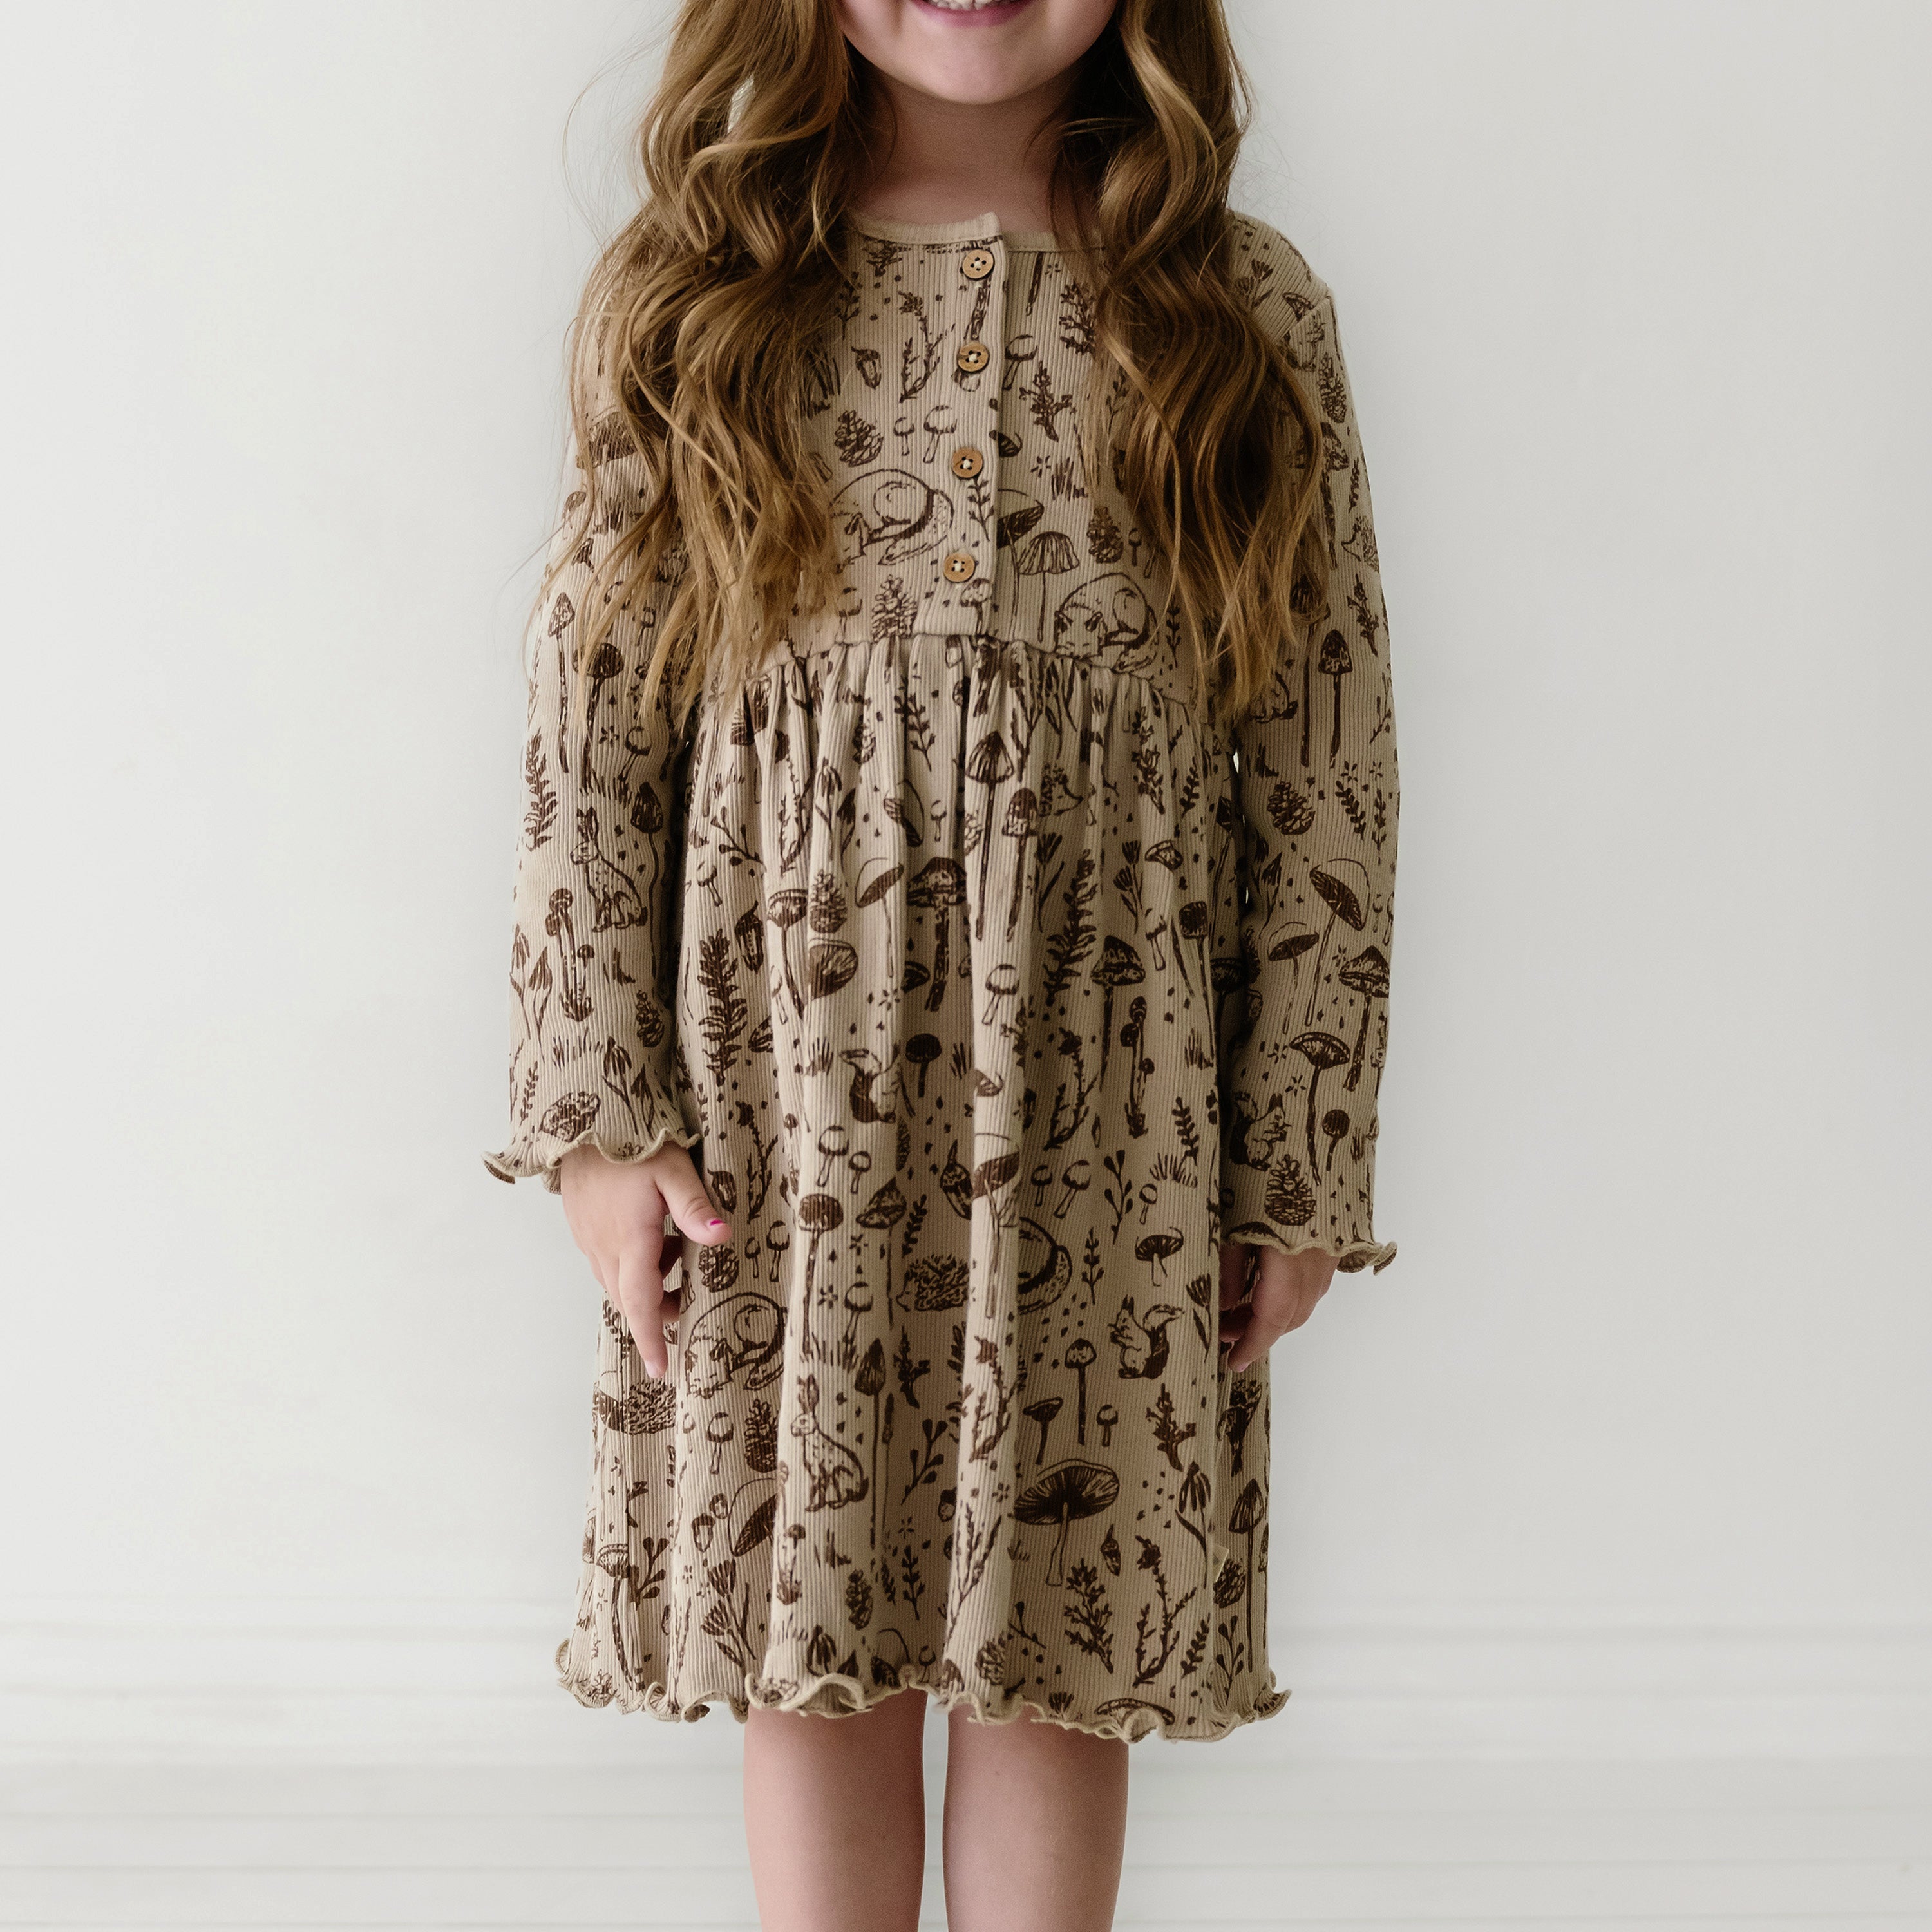 A young girl with long, wavy hair wearing an Organic Kids beige dress with botanical and animal prints, standing against a plain white background. She is smiling slightly while facing the camera.